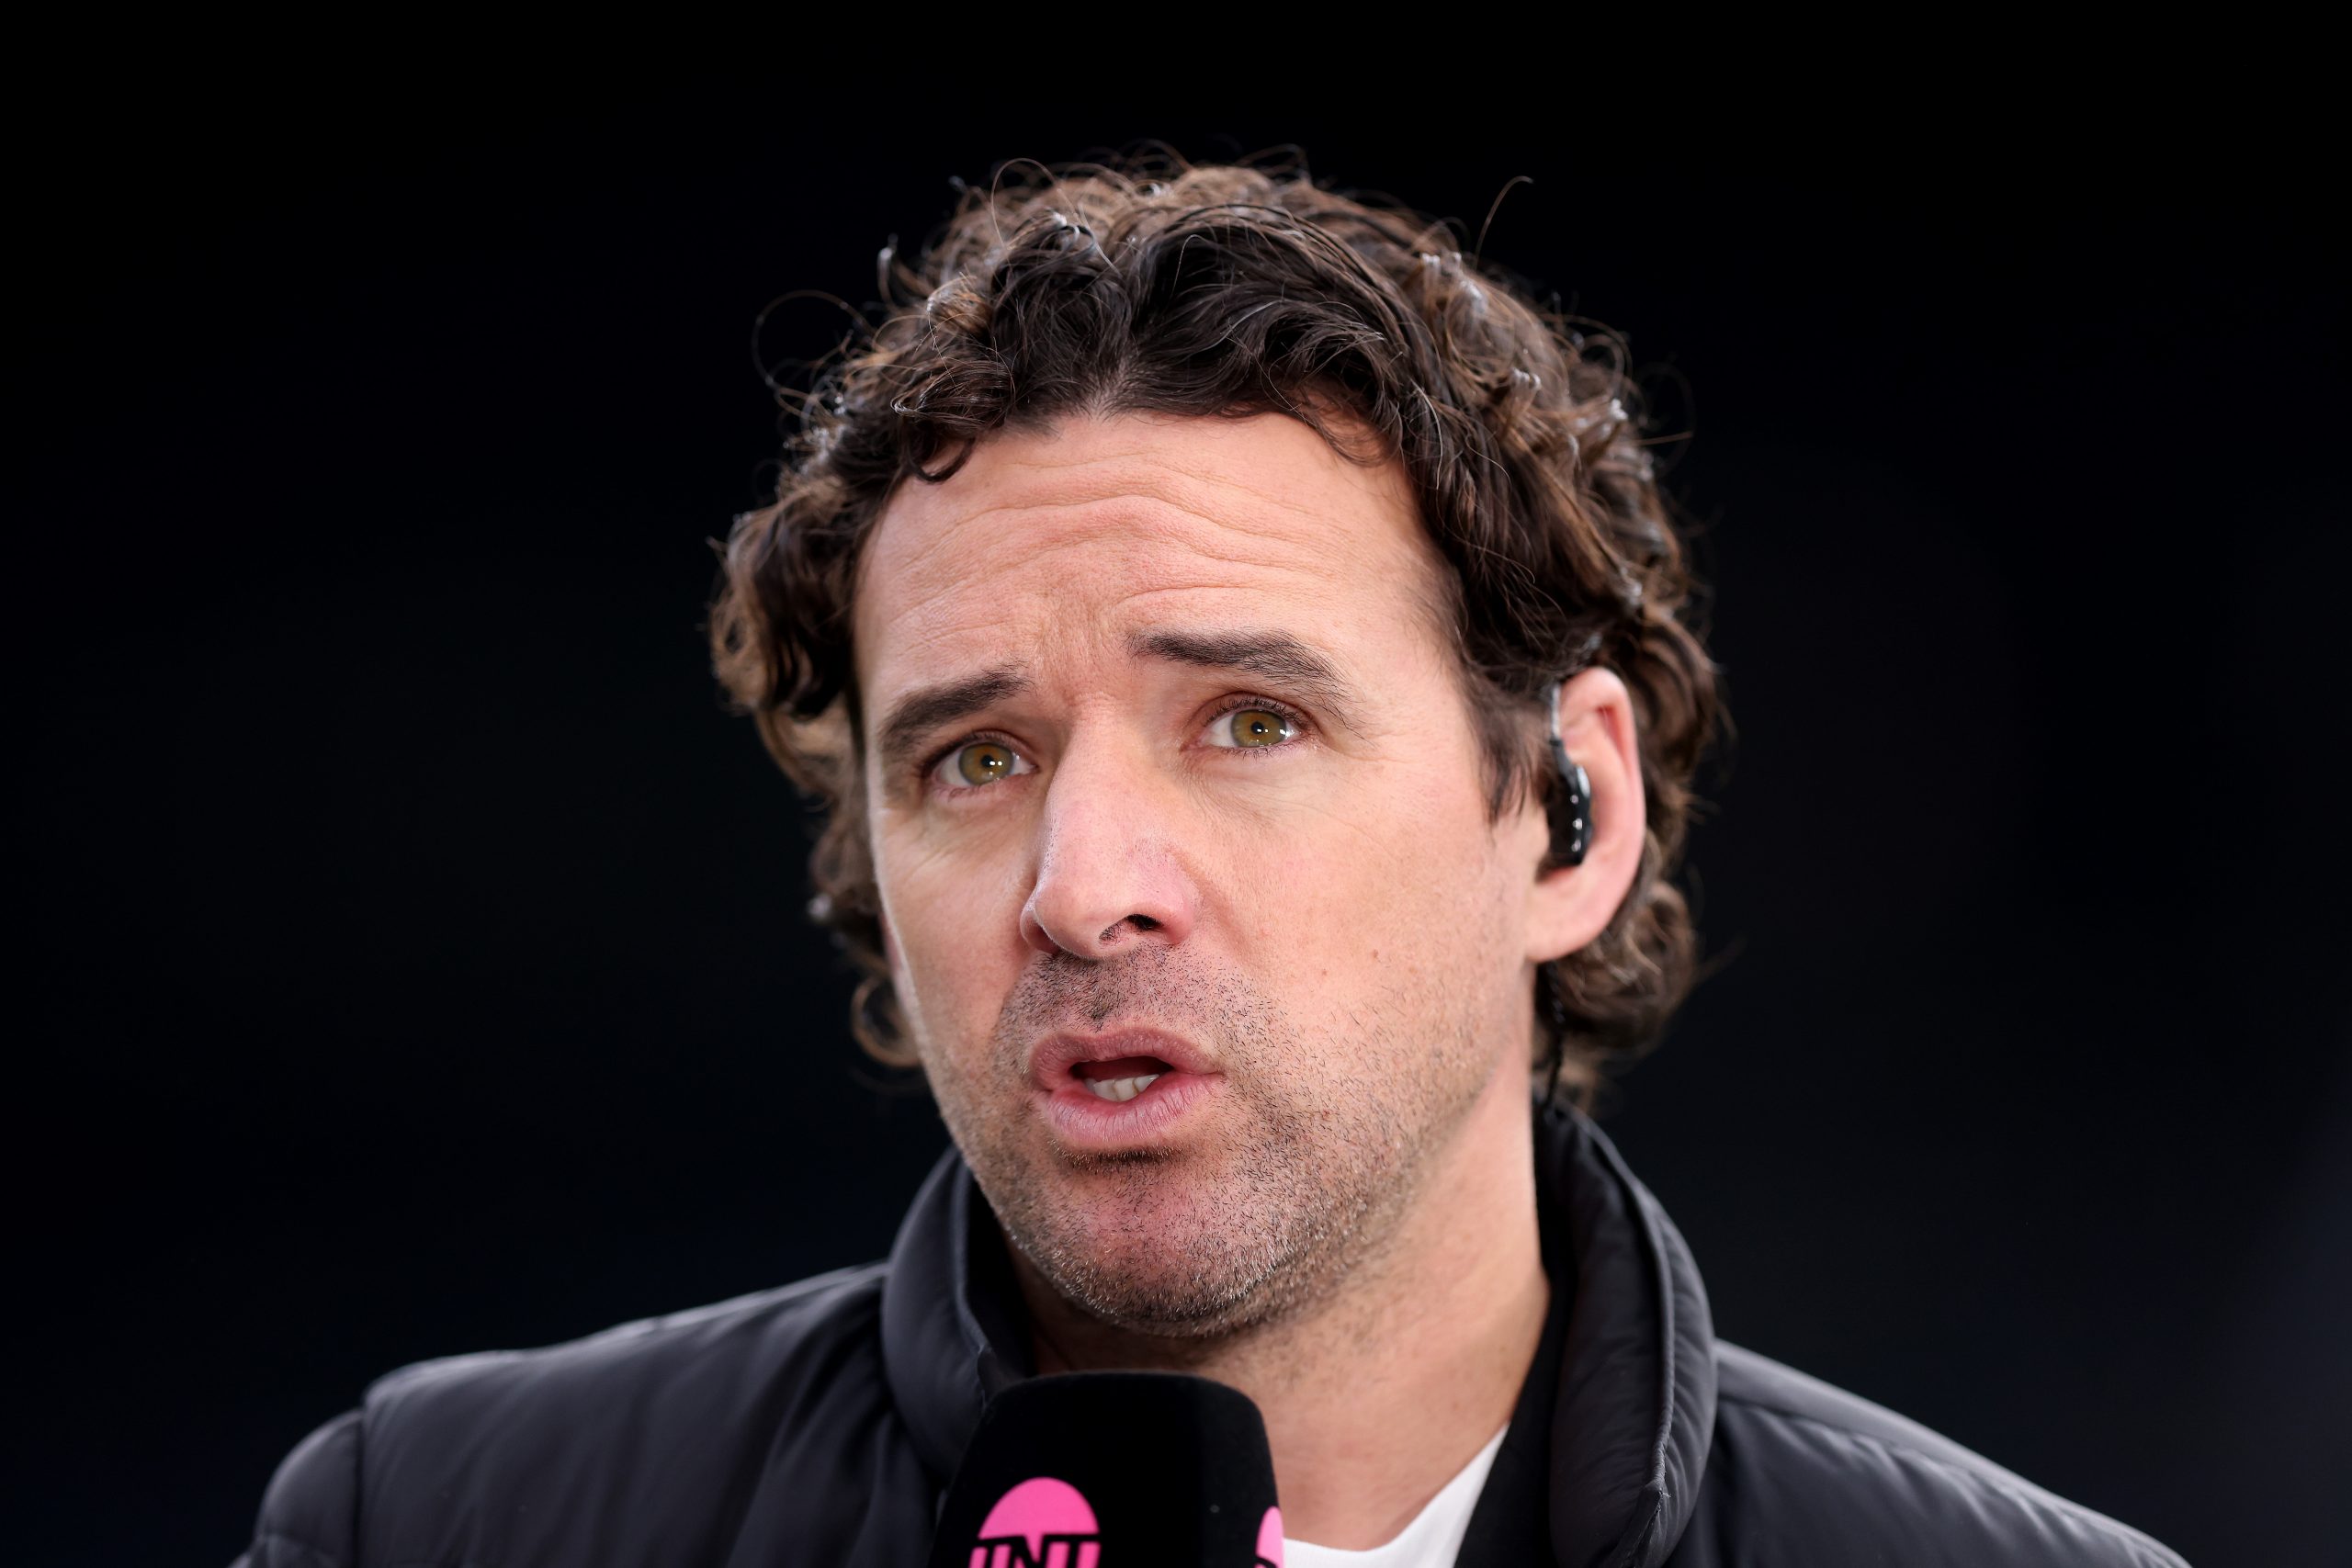 Arsenal are likely to beat Manchester United, says Owen Hargreaves.